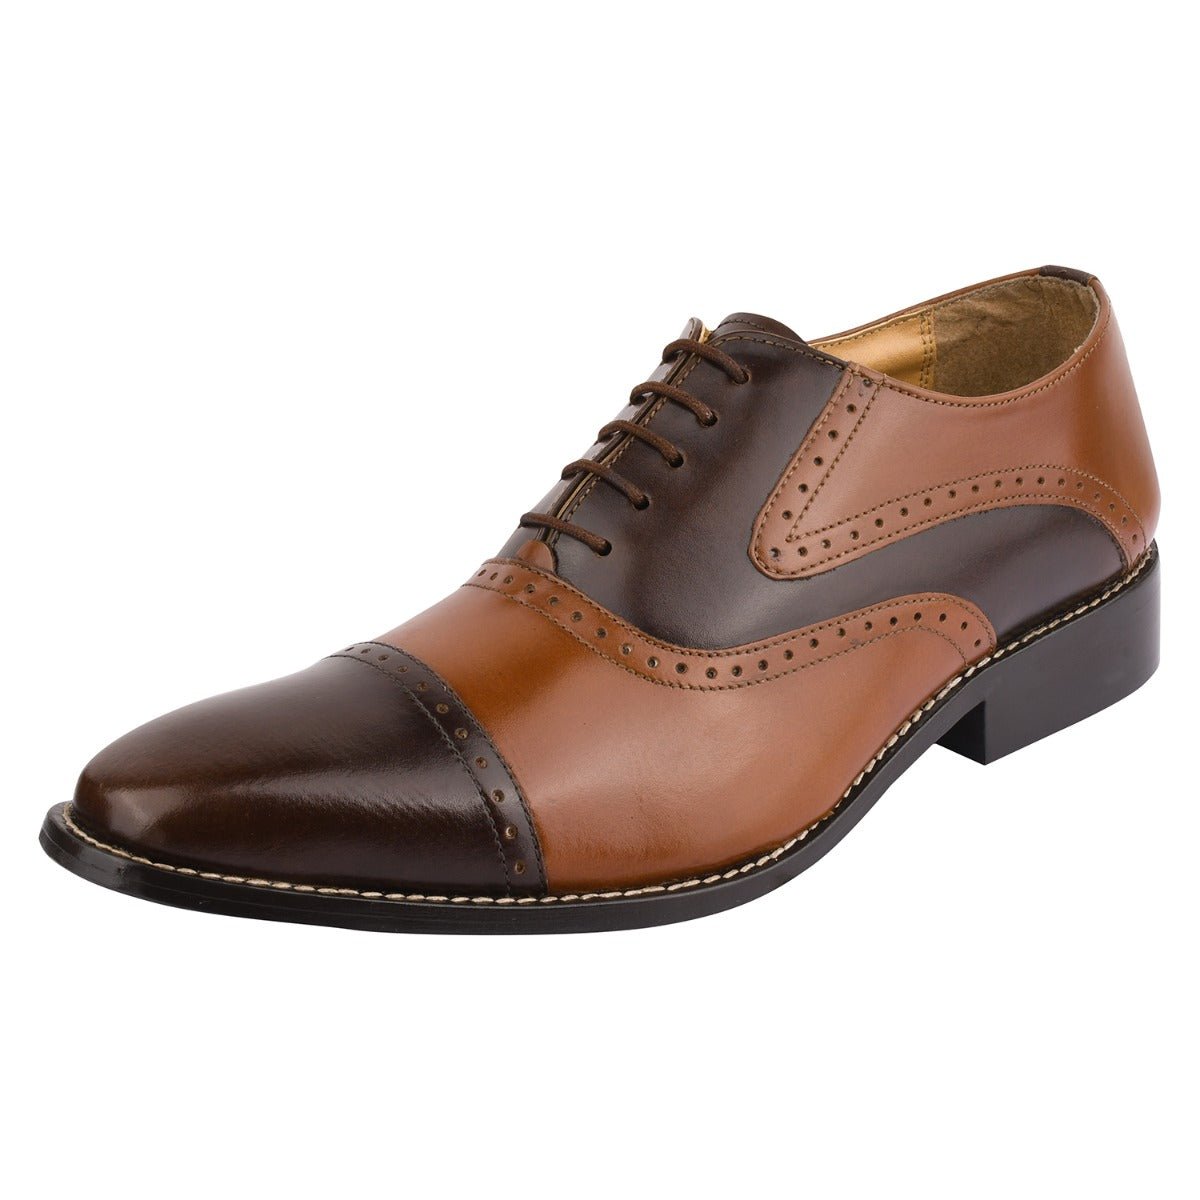 Suave Leather Oxford Style Dress Shoes